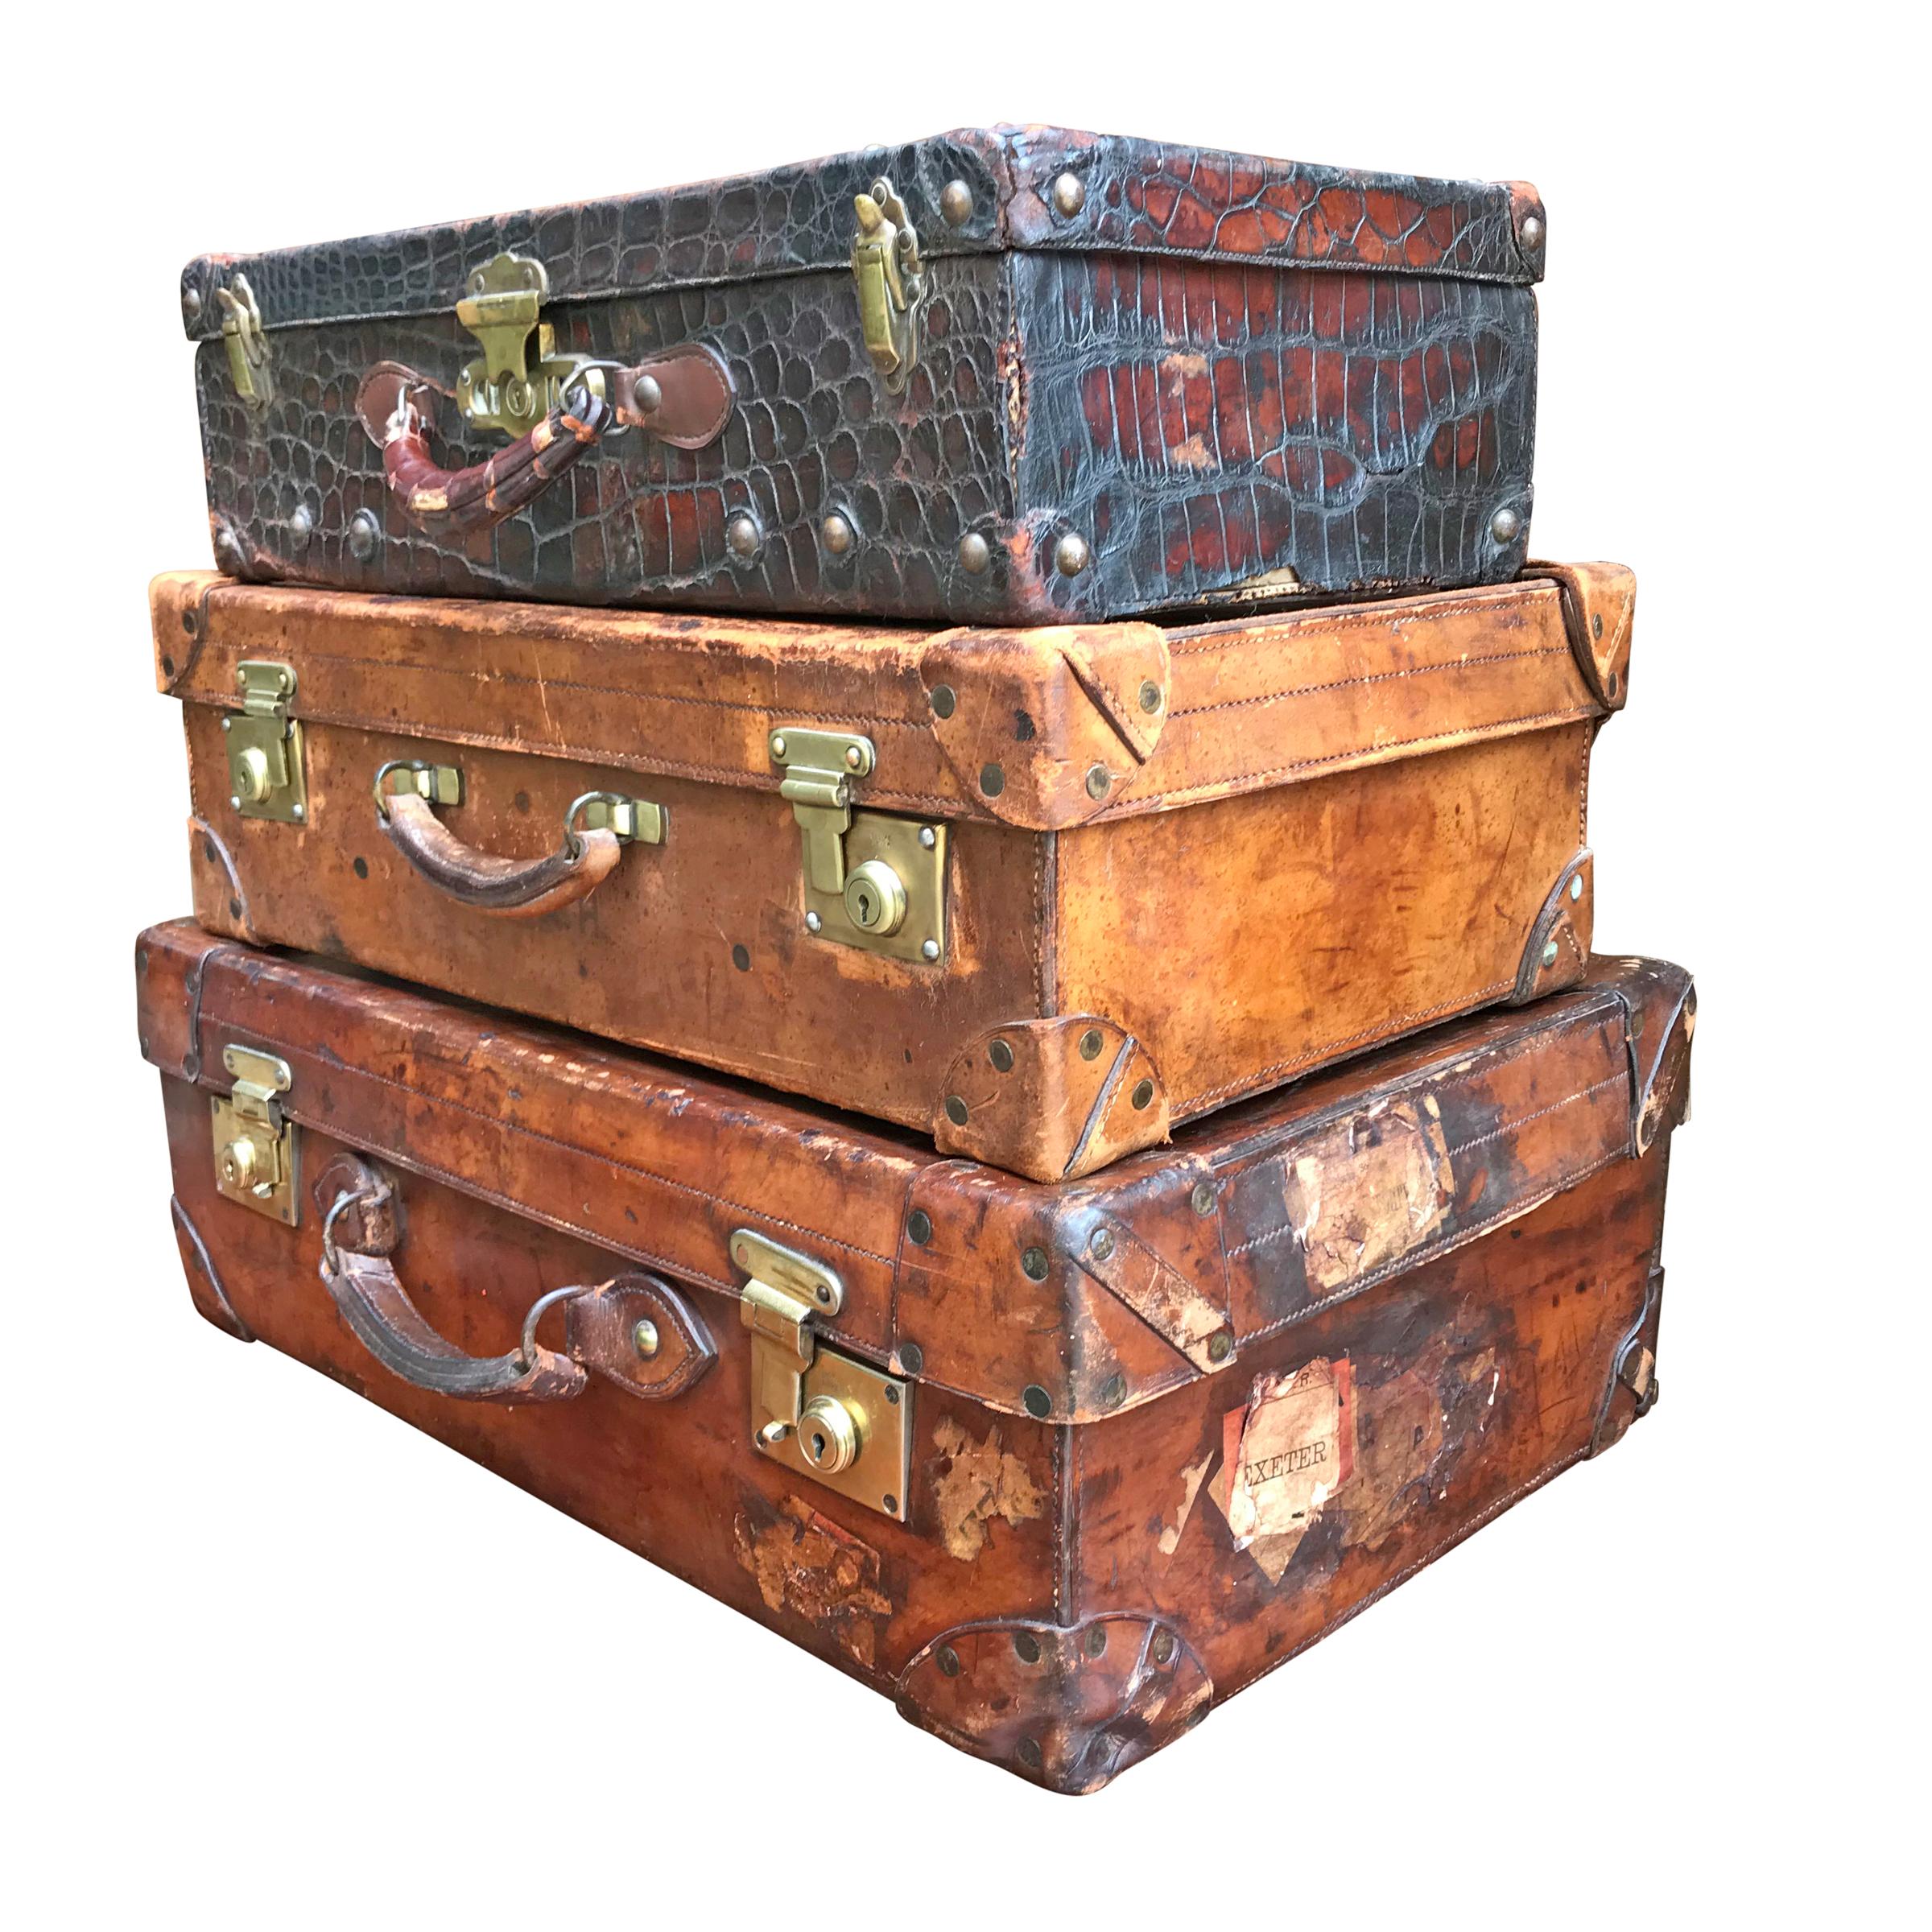 A fantastic set of three early 20th century English Edwardian period leather suitcases including two thick belting leather cases with polished brass hardware and the third case being made from crocodile, also with brass hardware. The largest case